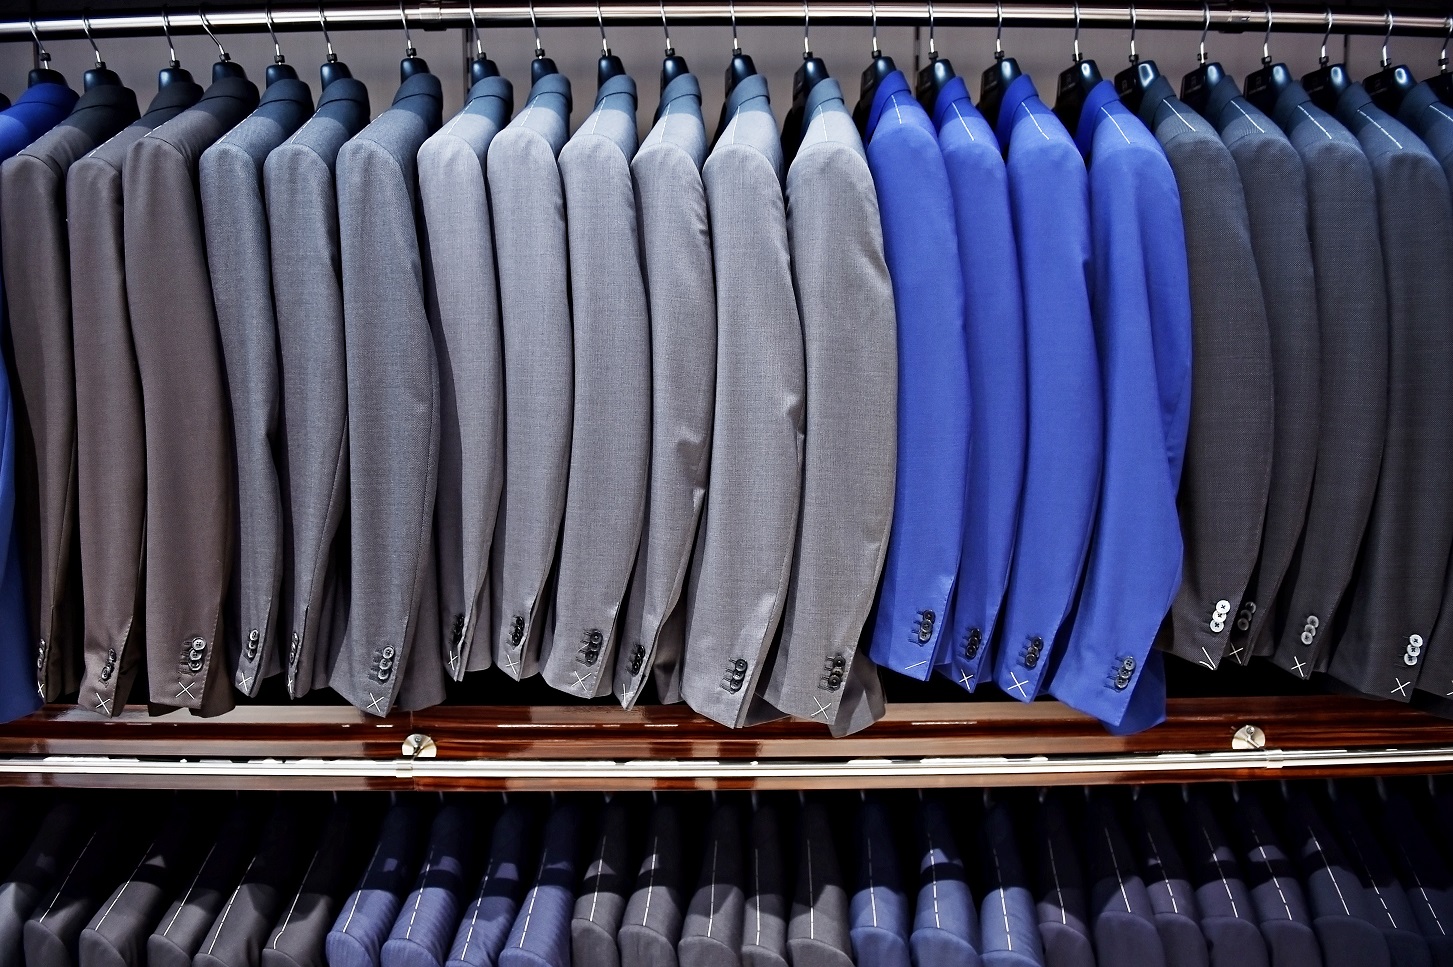 Elegant blue and gray suits on hangers